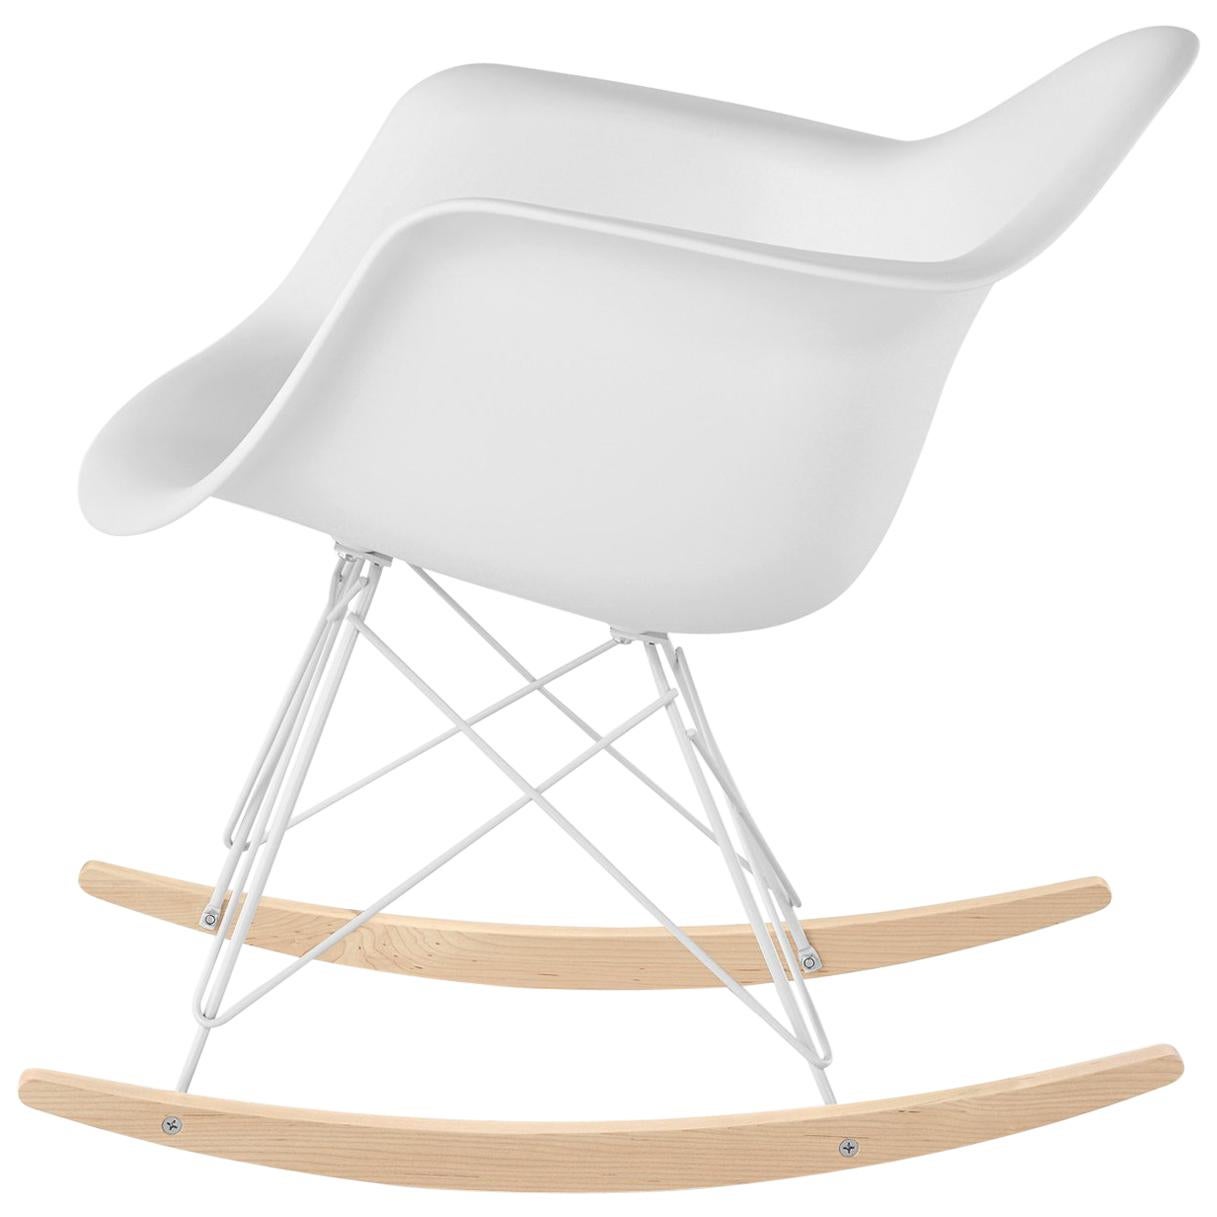 Eames Molded Armchair, Rocker Base designed by Charles and Ray Eames